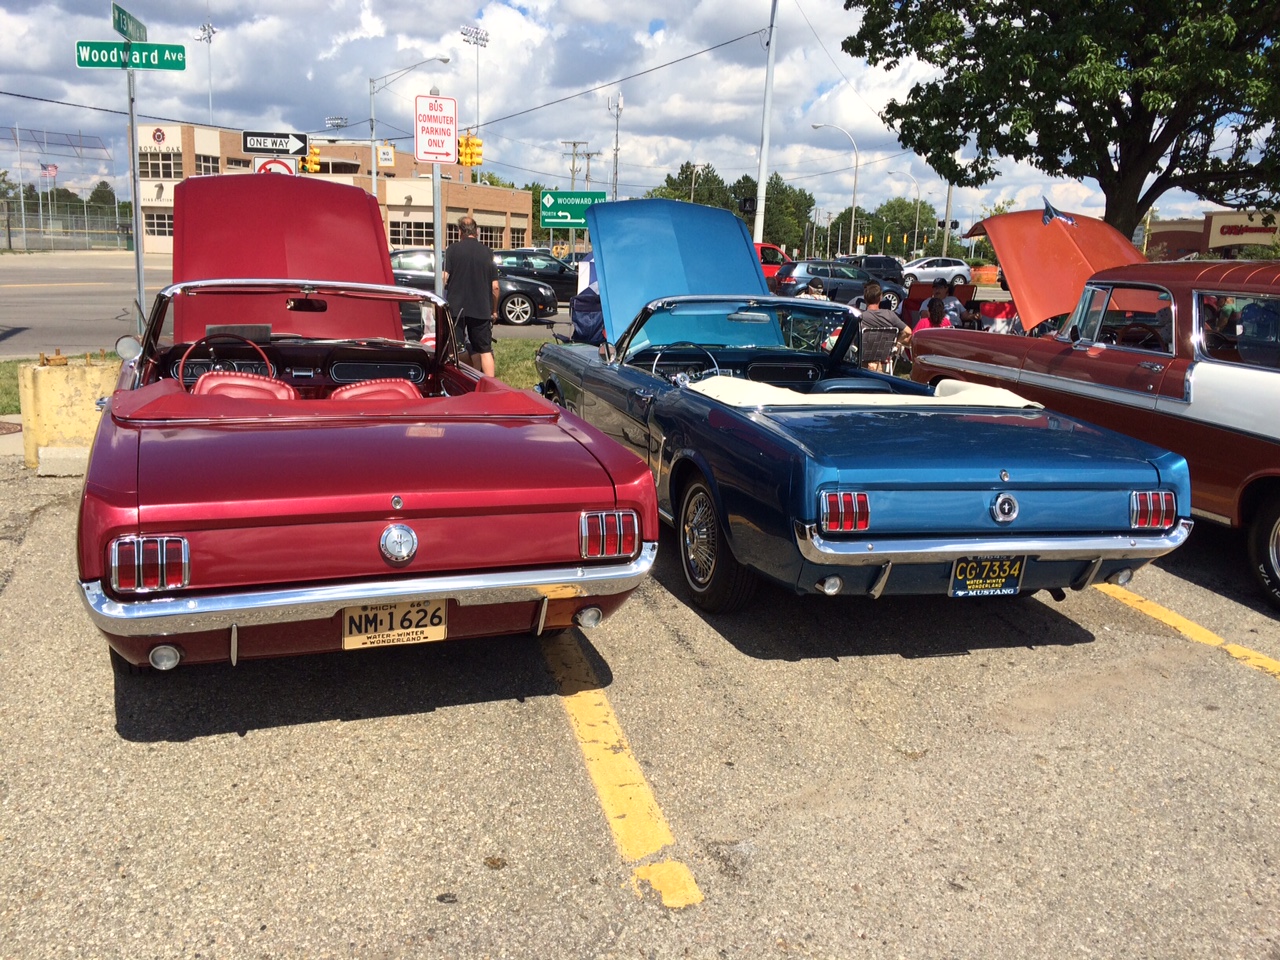 A behind the scenes look at the Woodward Dream Cruise from the Executive Director